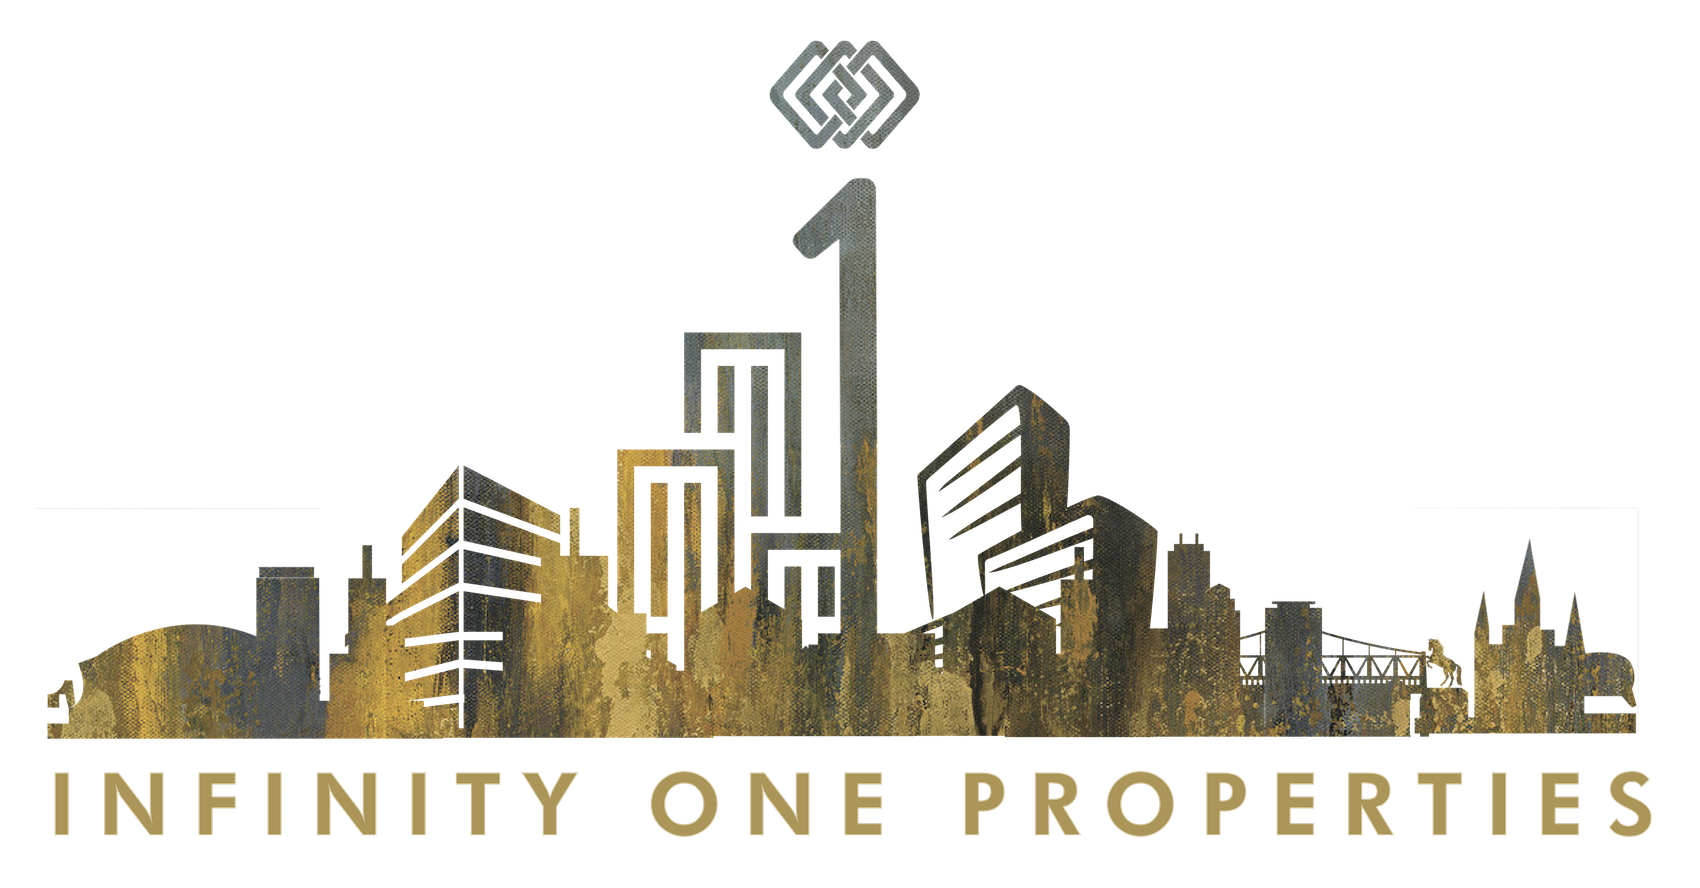 Infinity One Properties - New Orleans Property Management Company